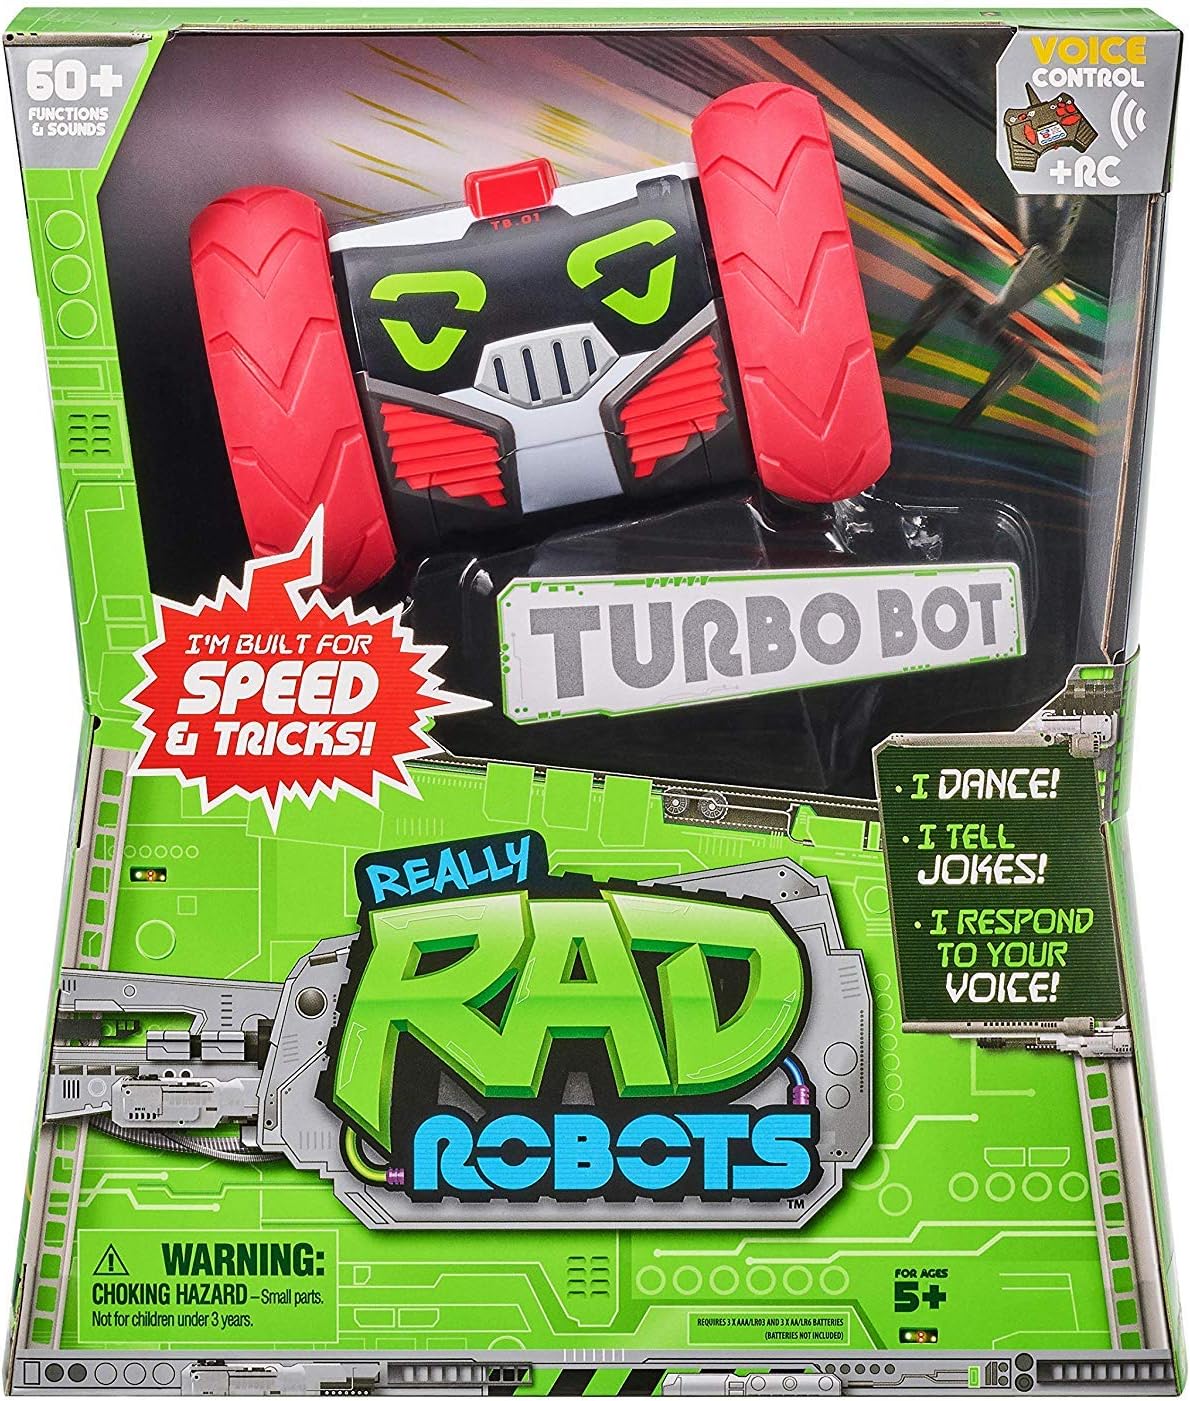 Review: Turbo Bot - The Ultimate Electronic Remote Control Robot